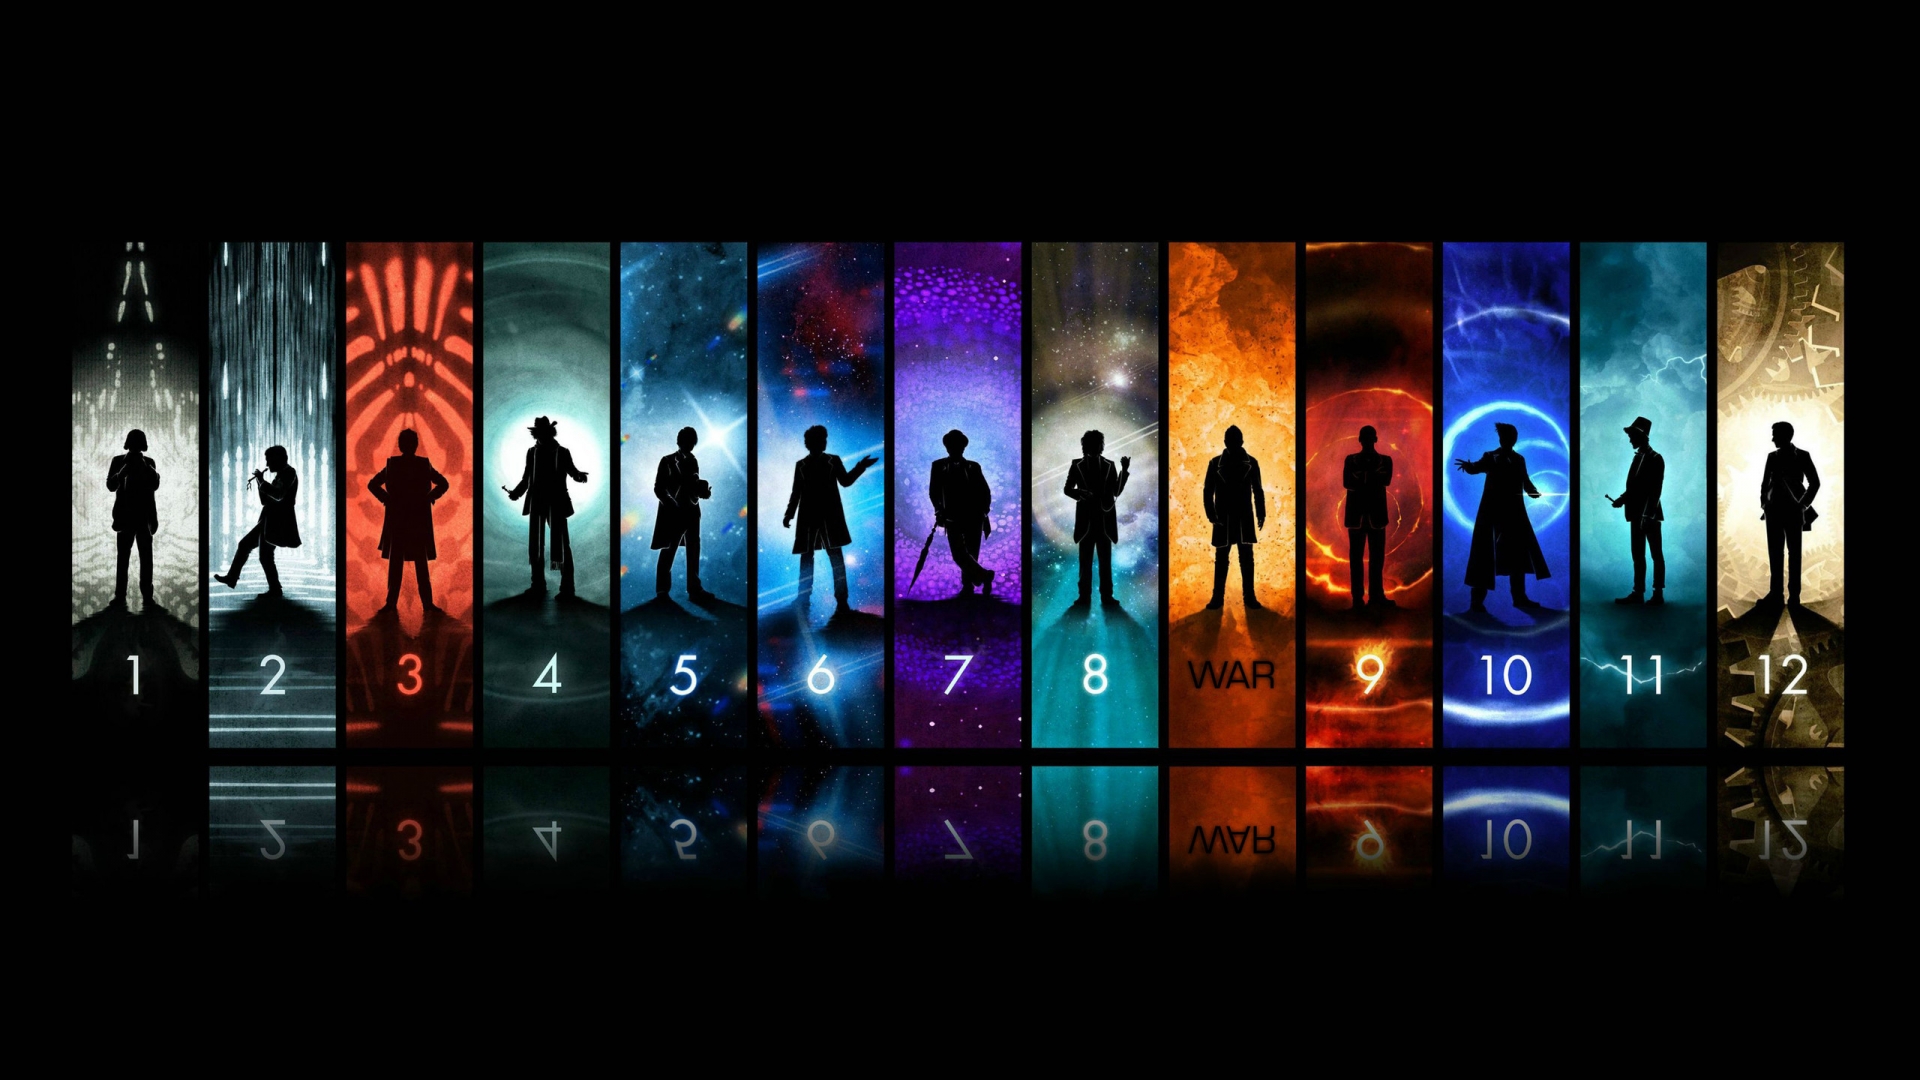 Heroes Reborn Characters for 1920 x 1080 HDTV 1080p resolution